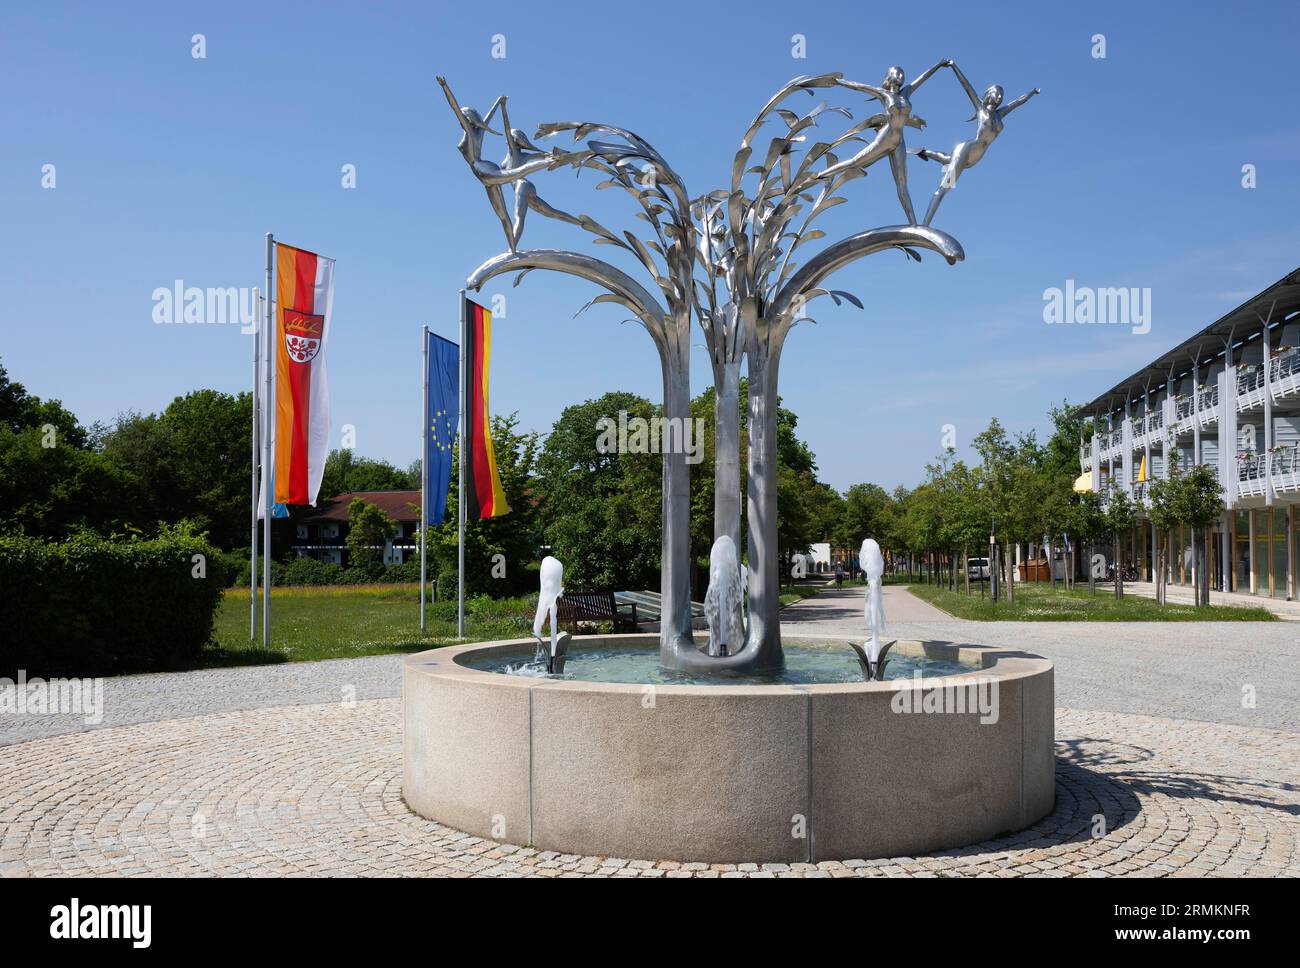 Fountain in the spa gardens, Bad Birnbach, Lower Bavarian spa triangle, Rottal Inn district, Lower Bavaria, Germany Stock Photo